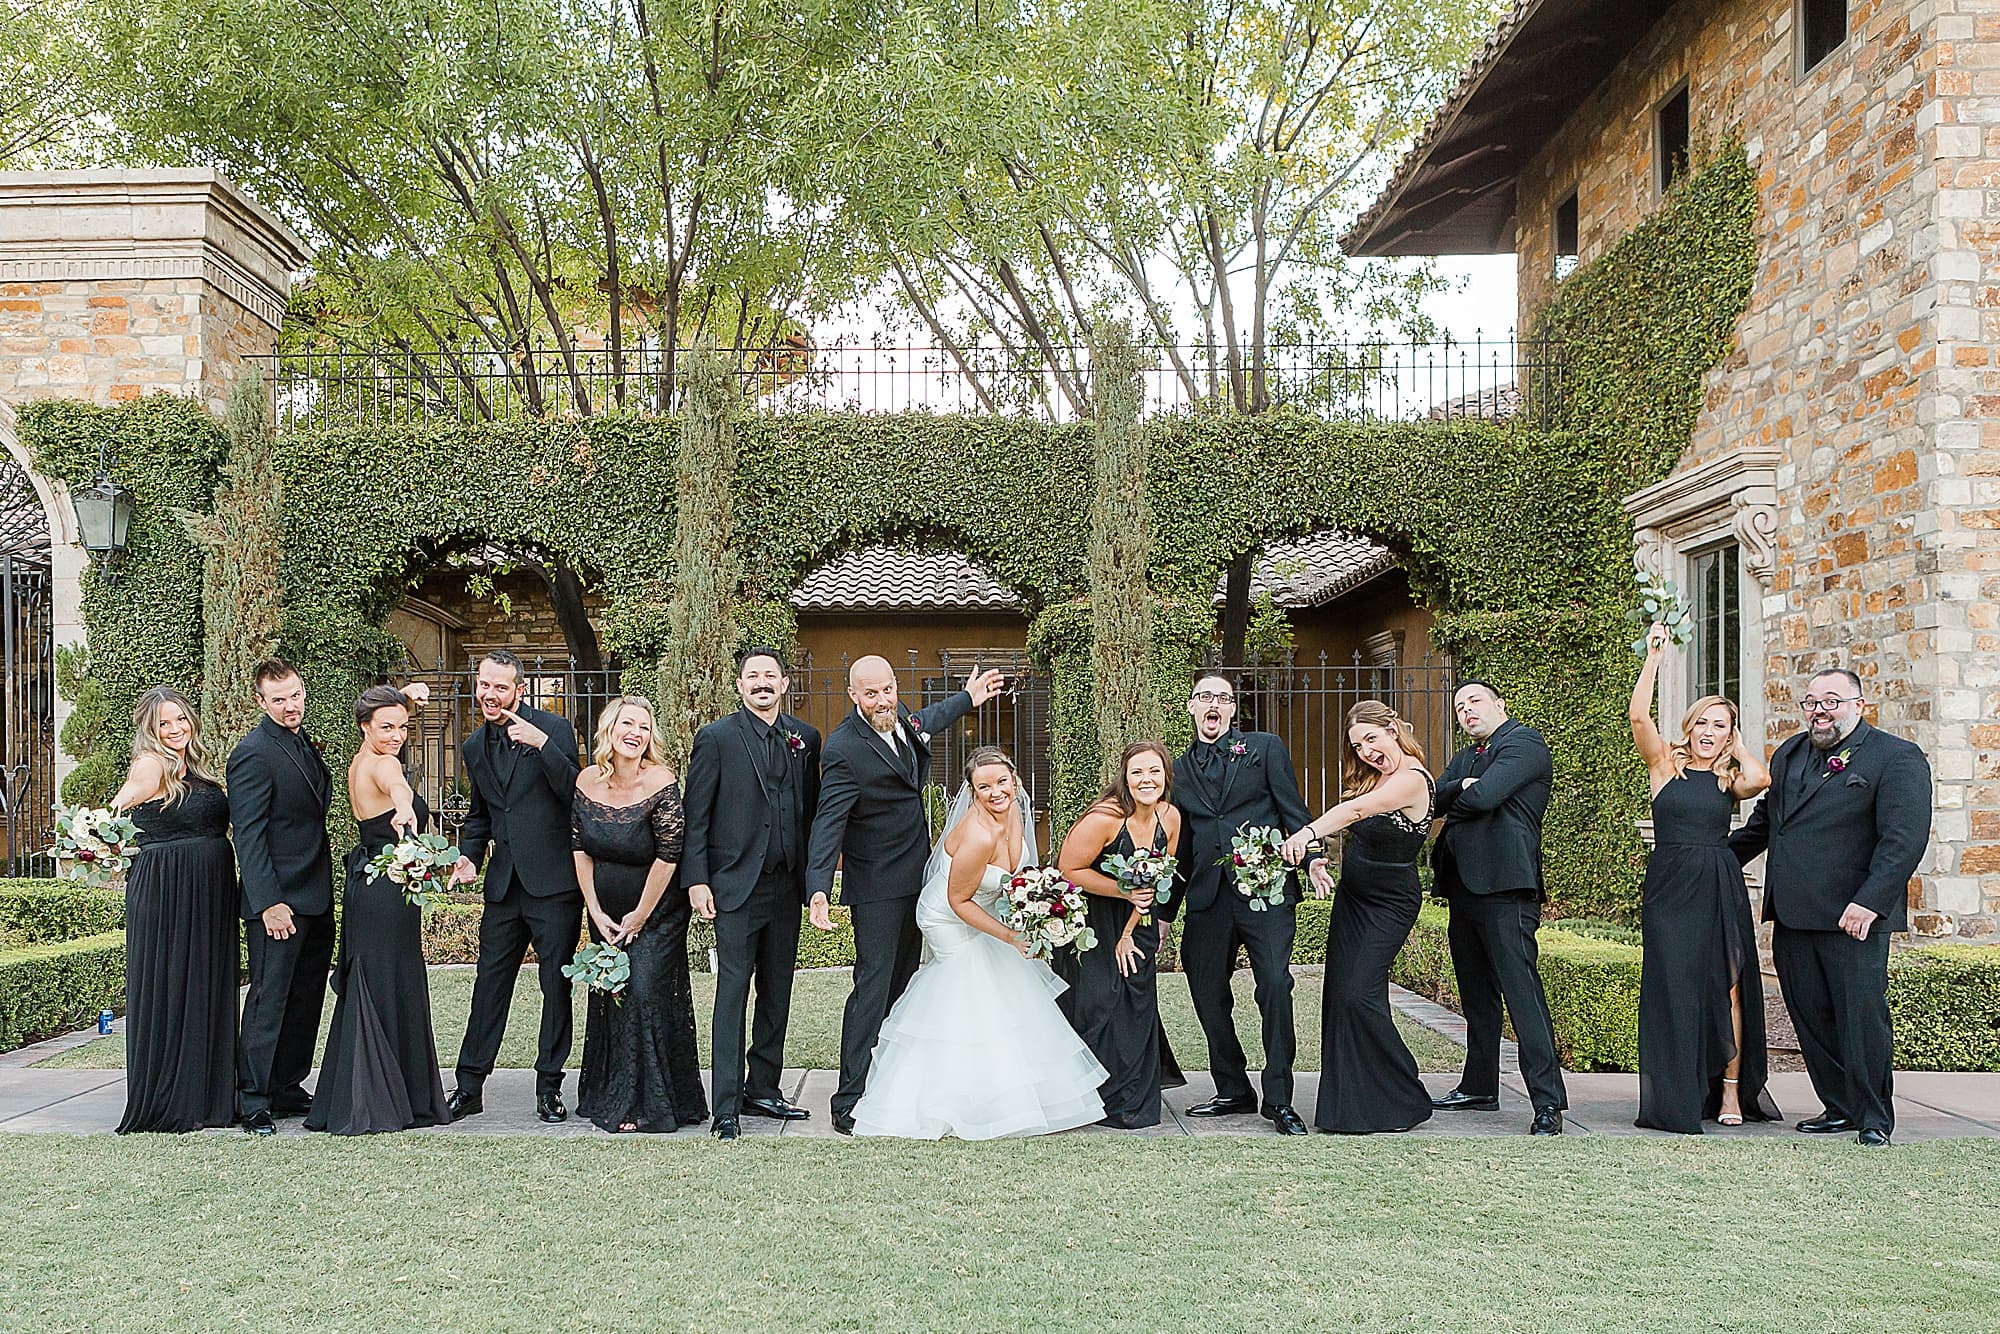 Classic Black and White Wedding Bridal Party Fun